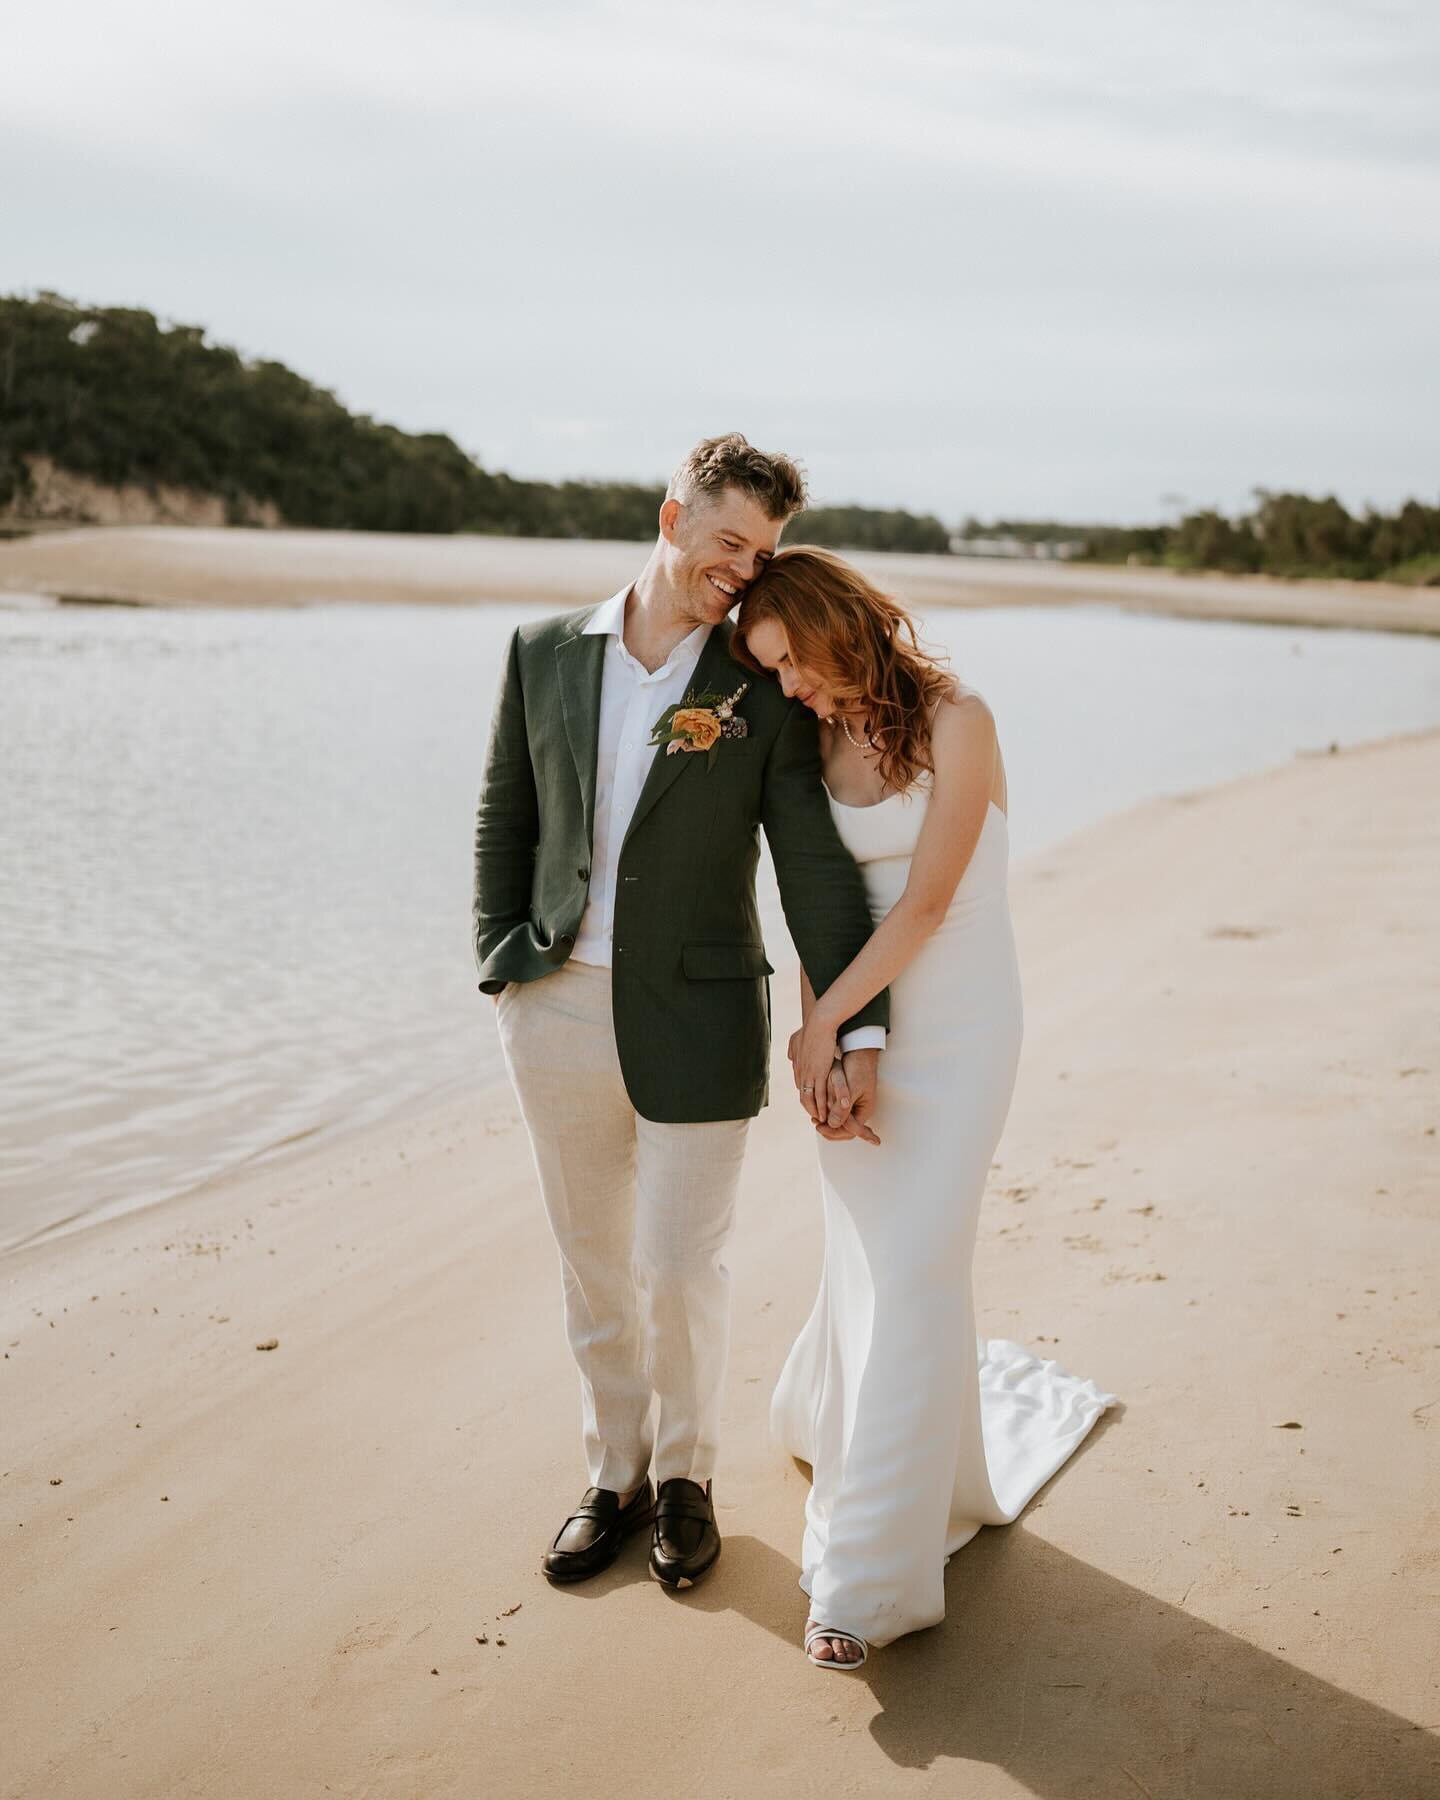 Coastal celebrations down at @thecovejervisbay with these two delightful souls, Kaitlyn and Luke ✨  A quiet moment out of a big day and a little walk along the waters edge ✨💕

#thecovewedding #thecovejervisbay #thecovejervisbaywedding #jervisbaywedd